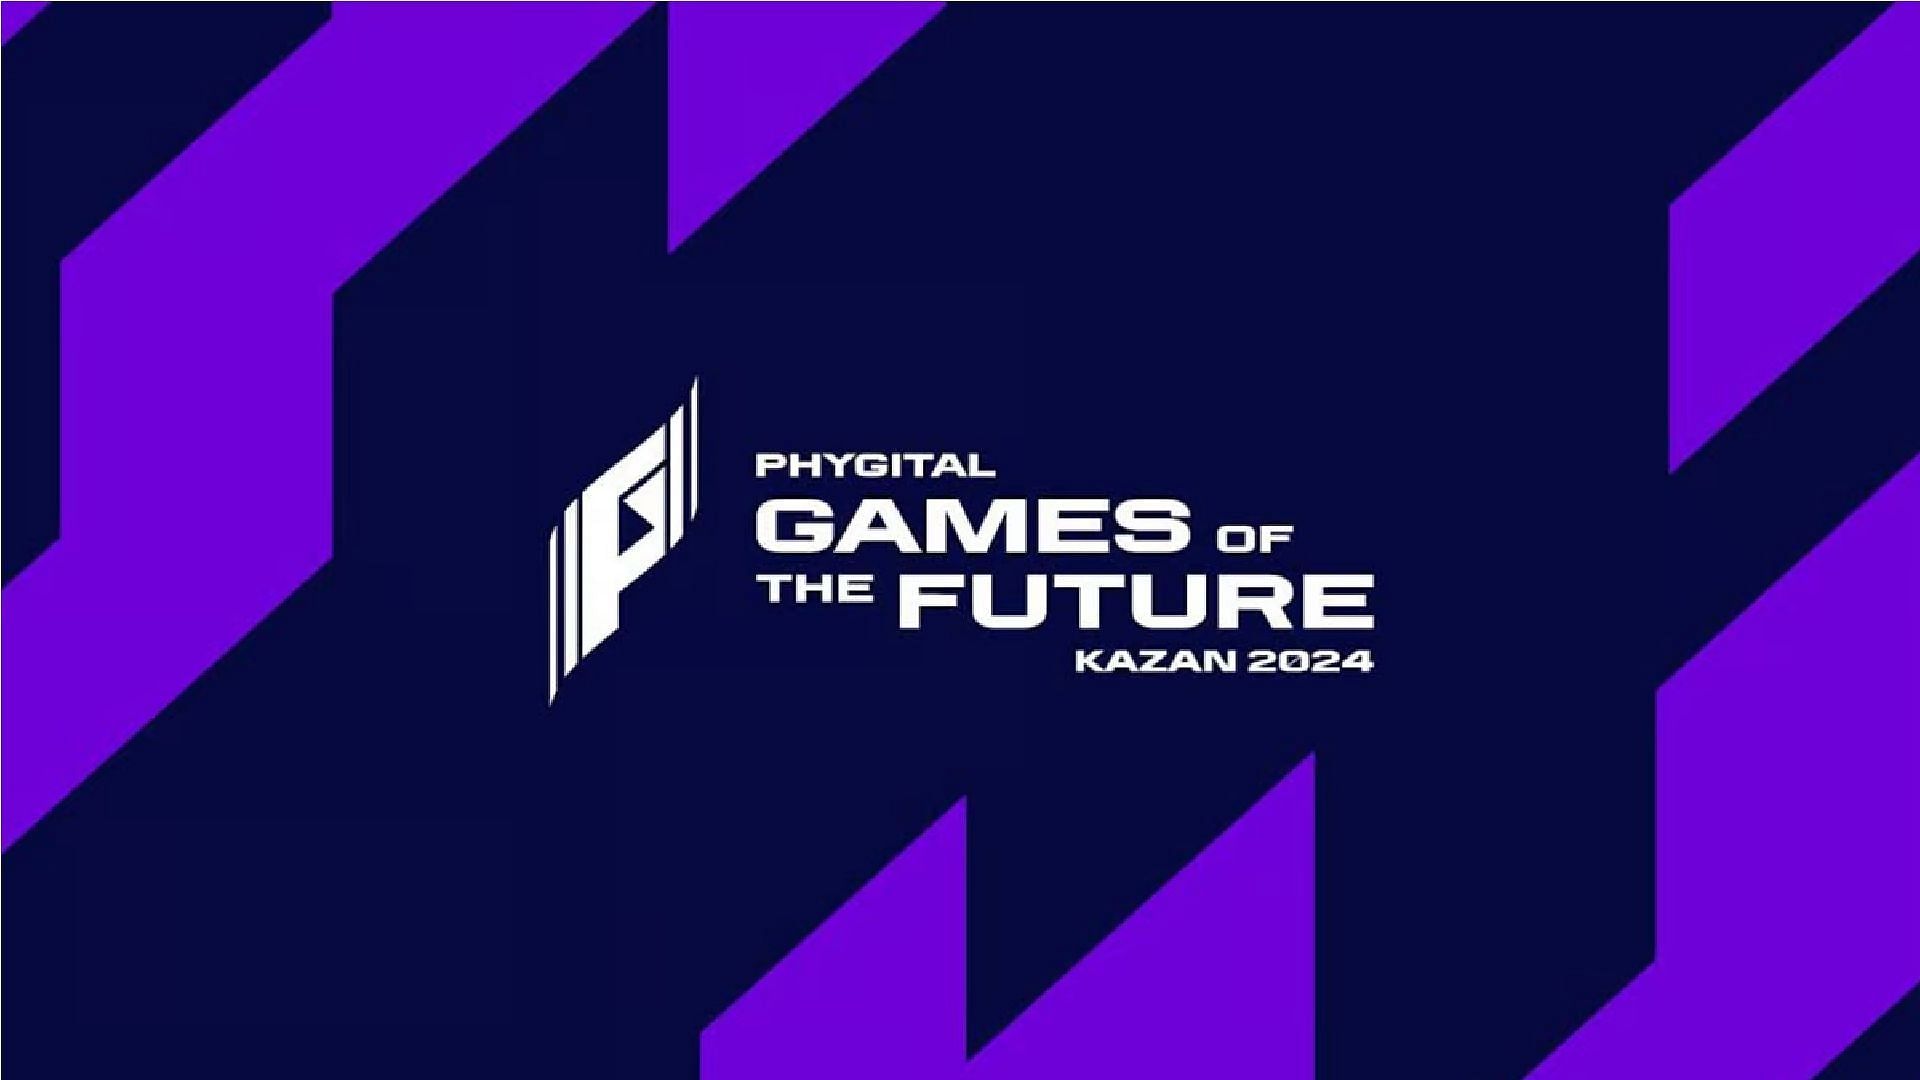 Mobile Legends Bang Bang Games of the Future 2024 brings some exciting games (Image via Games of the Future)